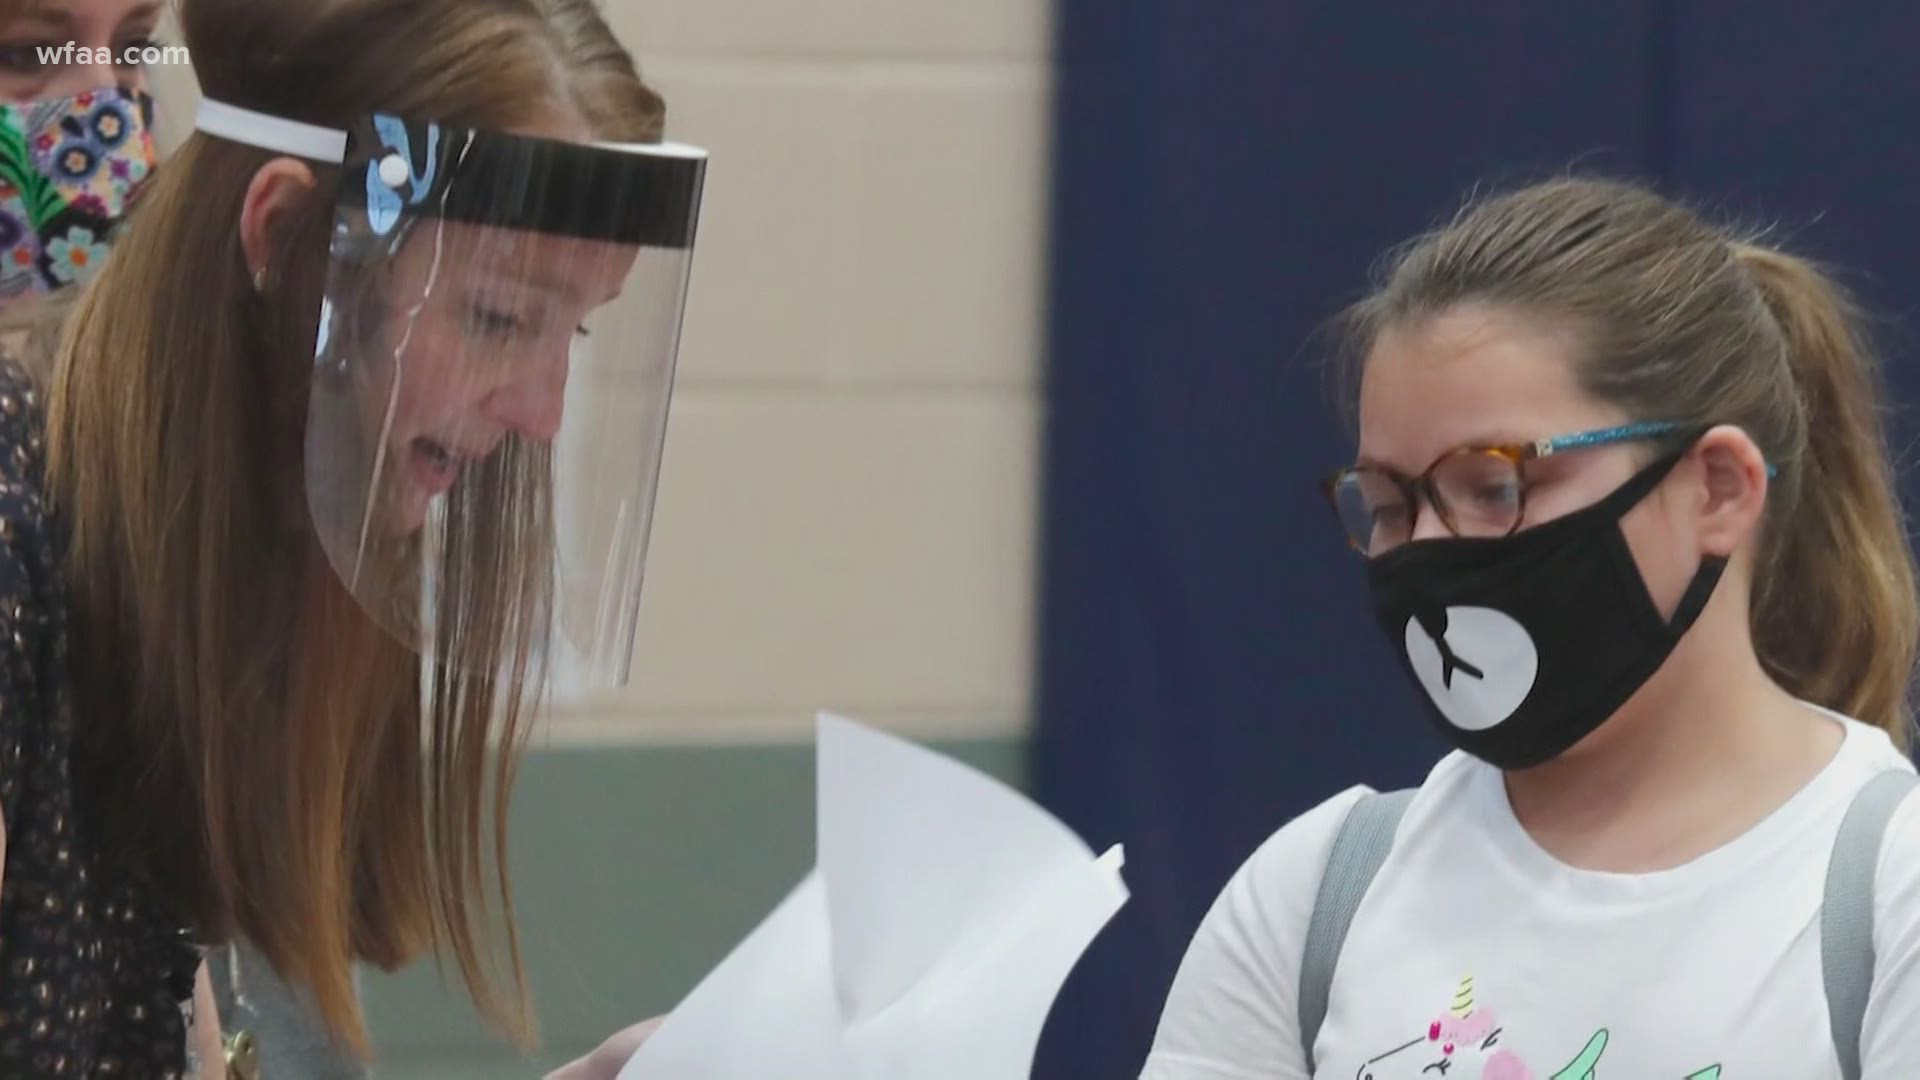 The Texas Education Agency’s guidance about using face shields in place of masks on a school campus differs from what the CDC recommends.